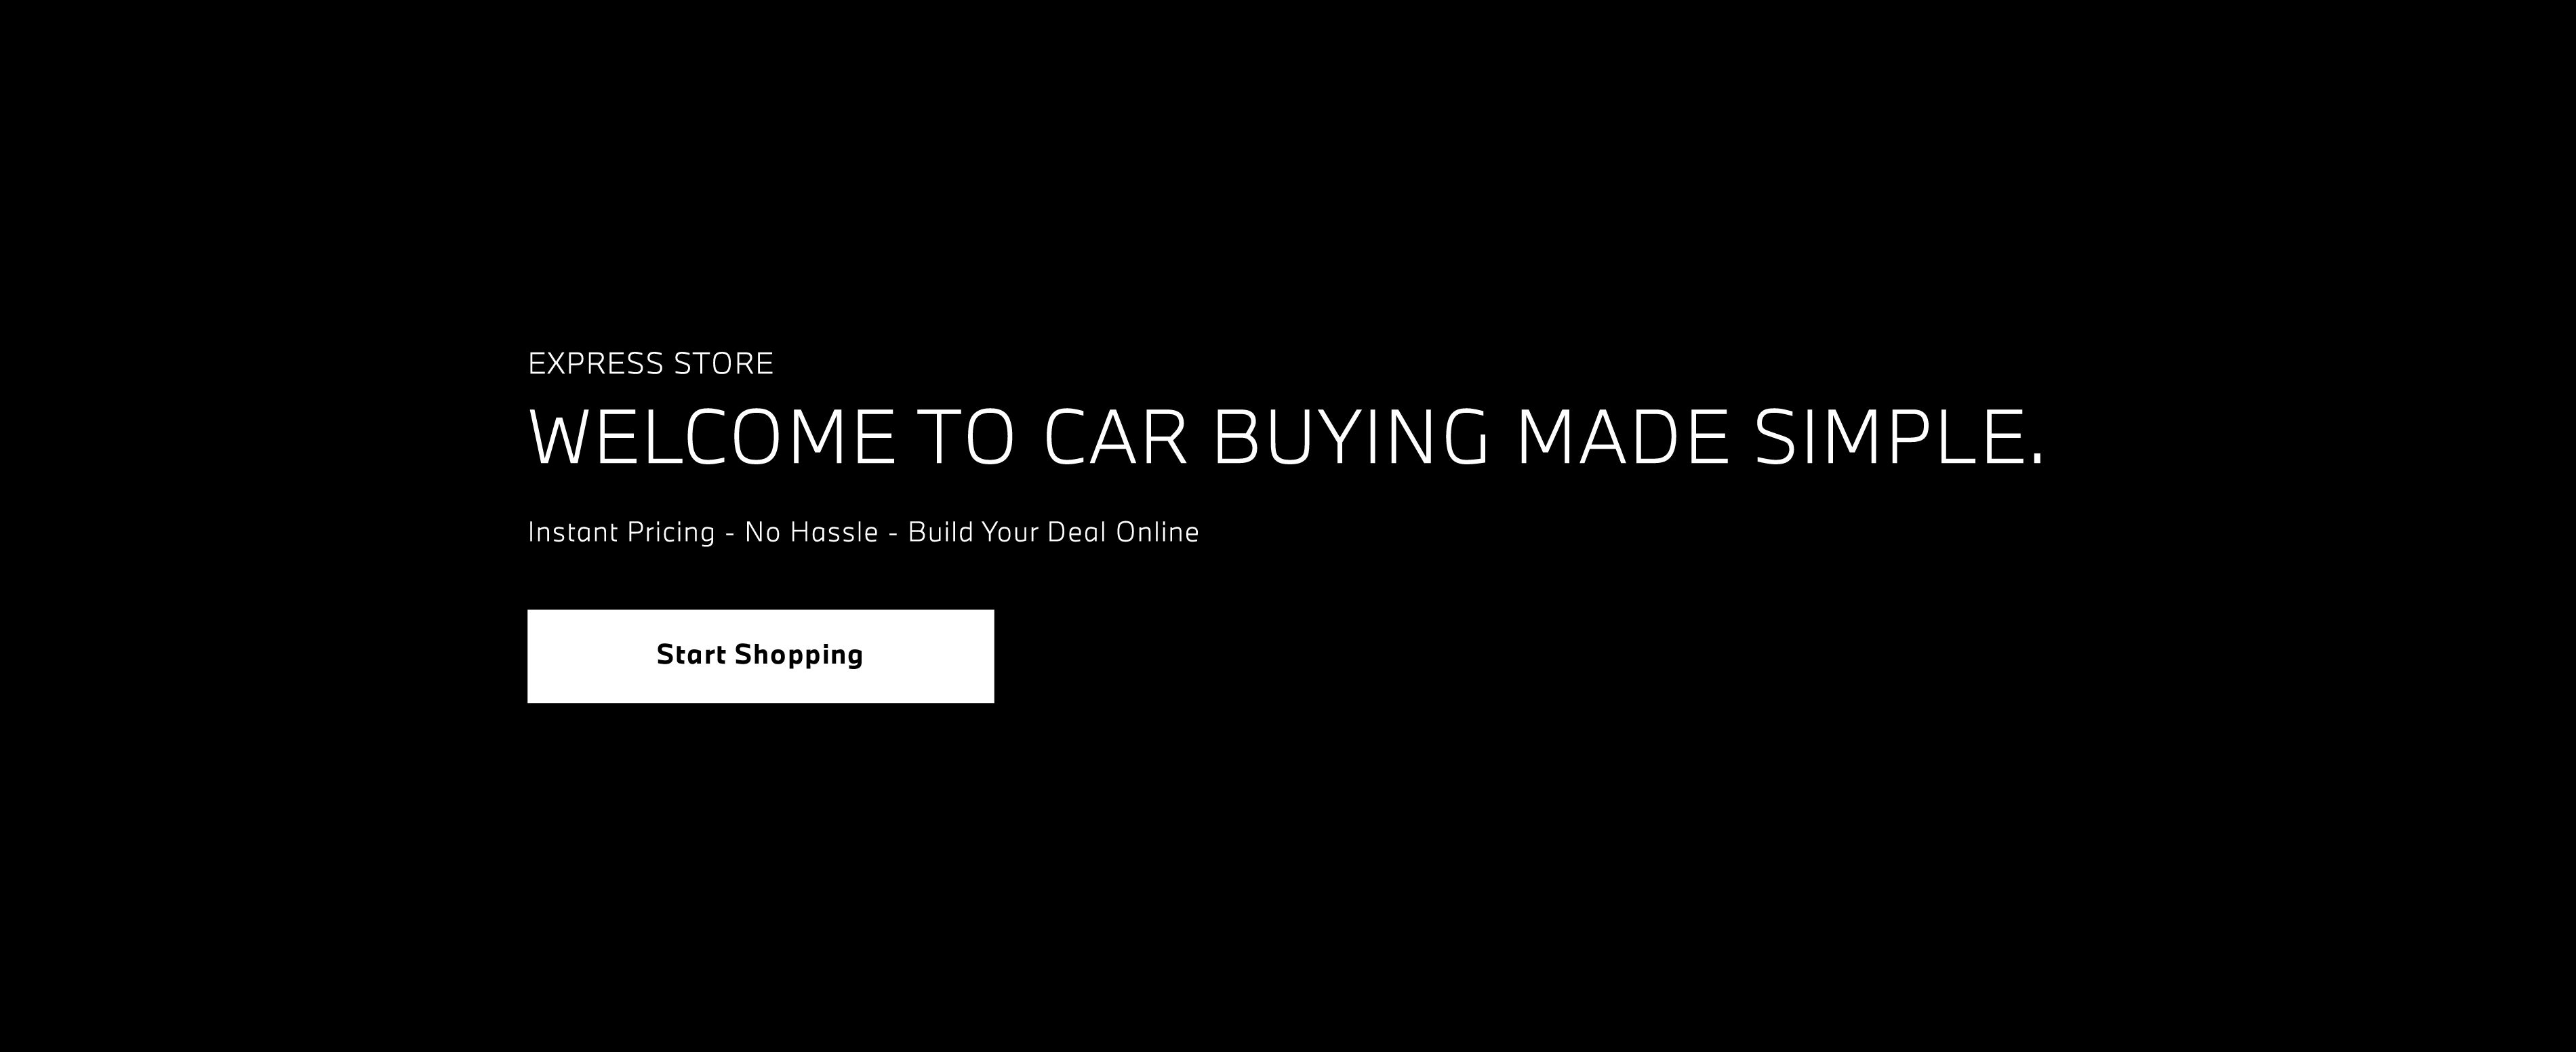 Welcome to Car Buying Made Simple